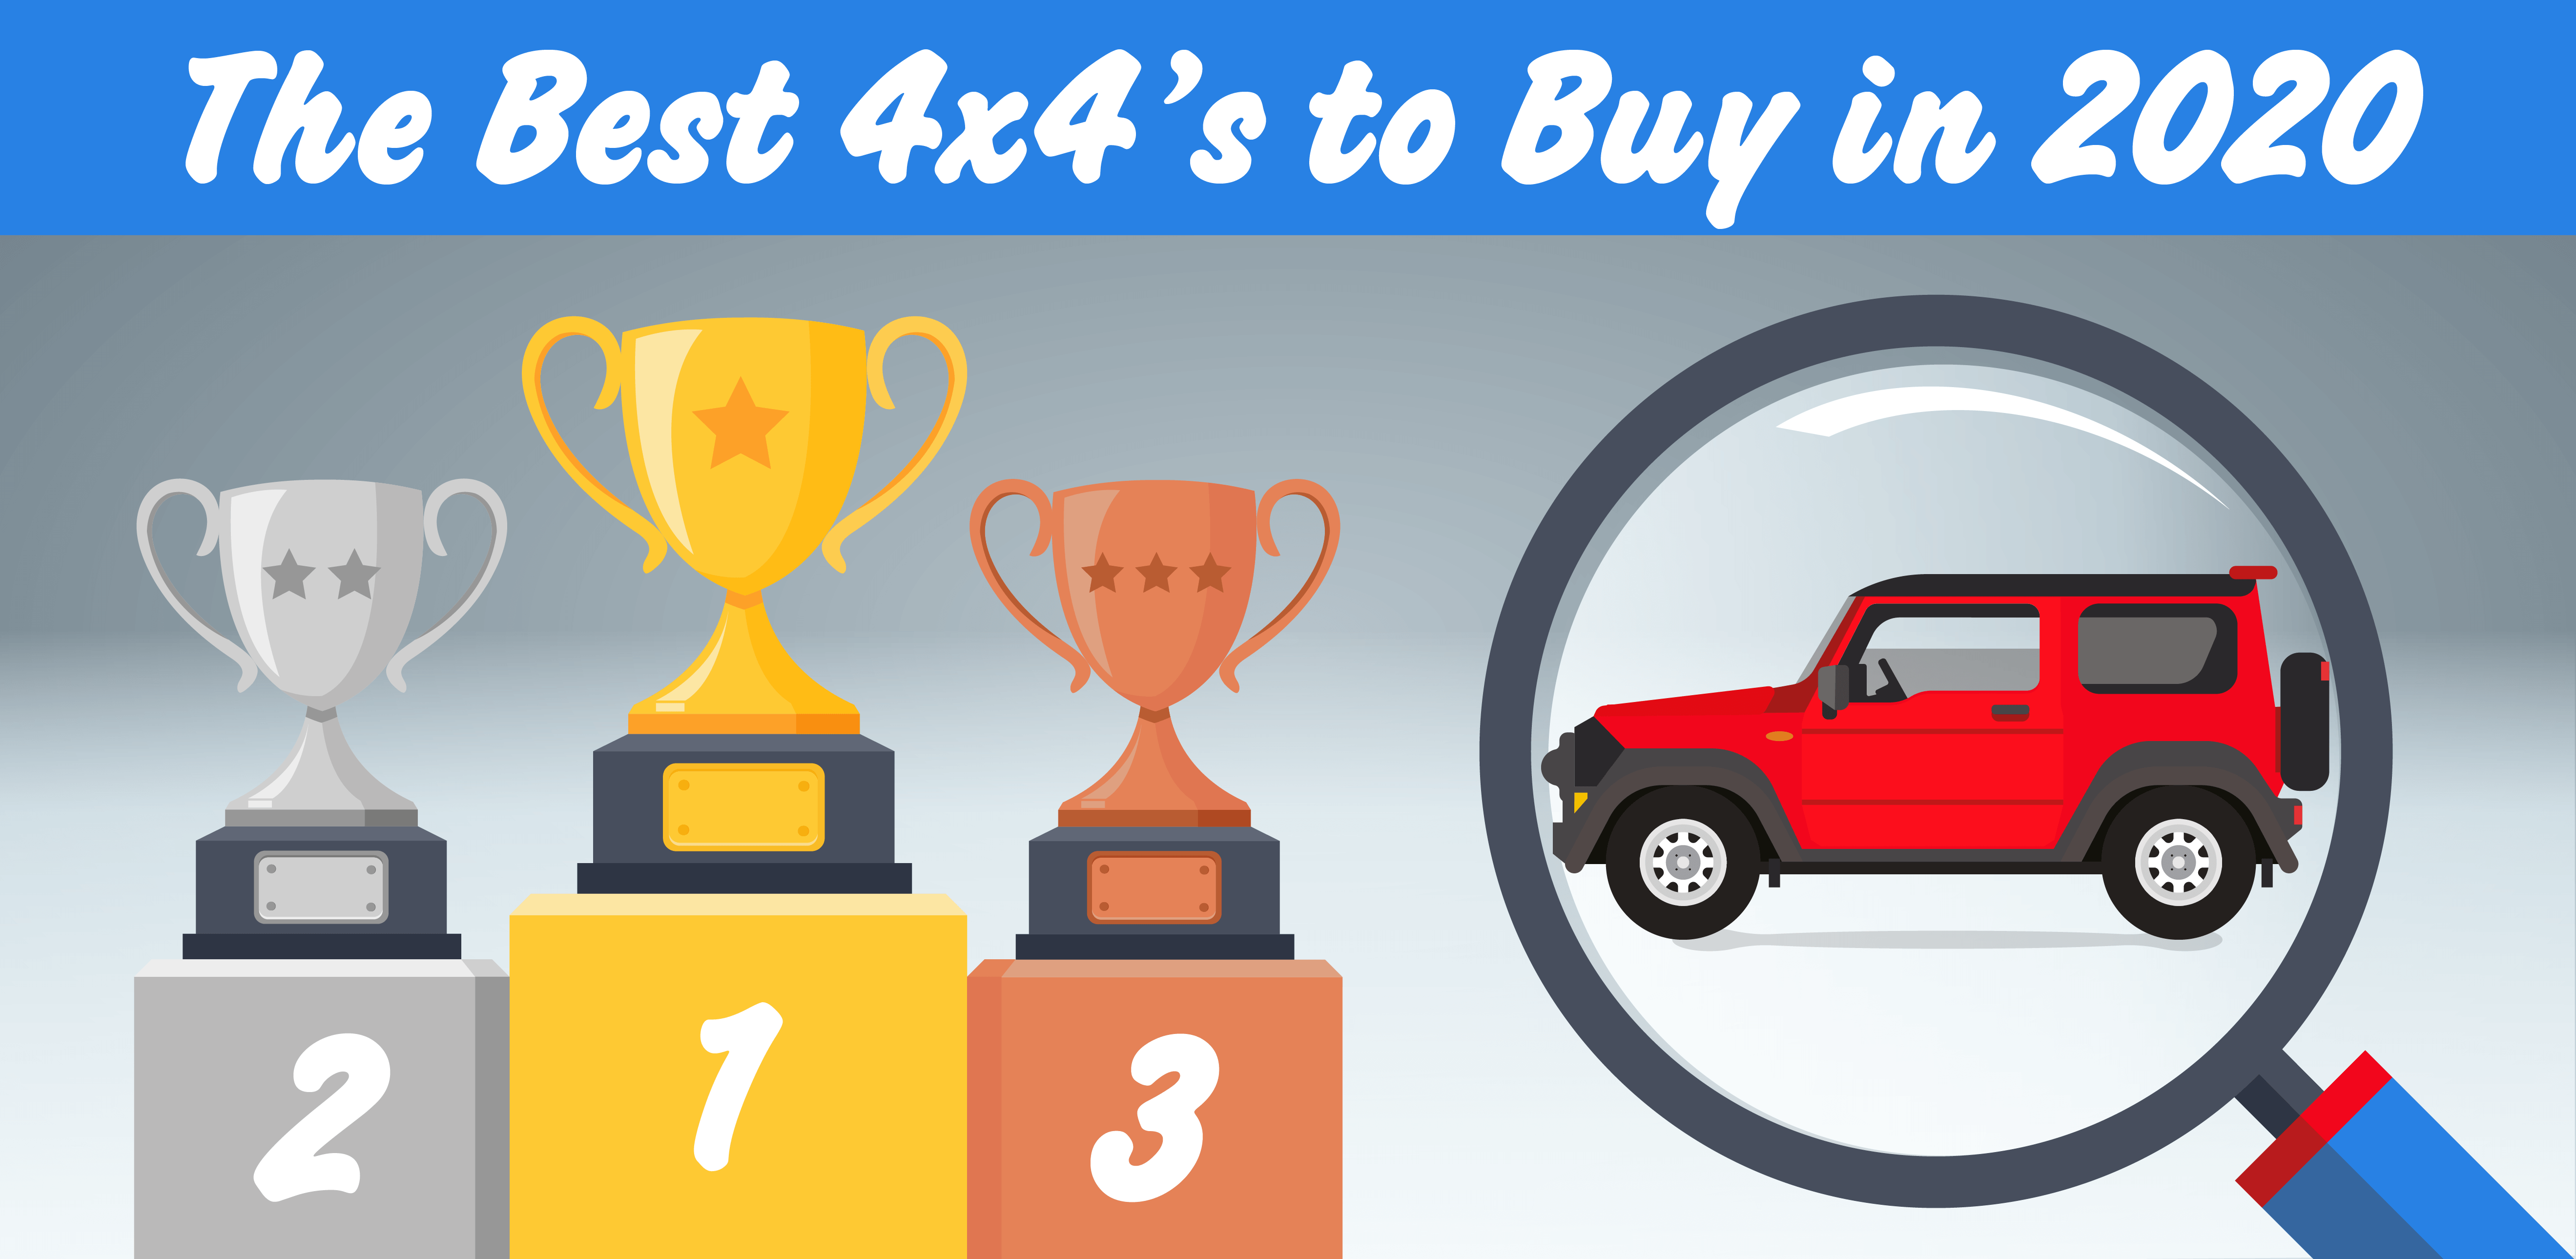 The Best 4x4s to Buy in 2020